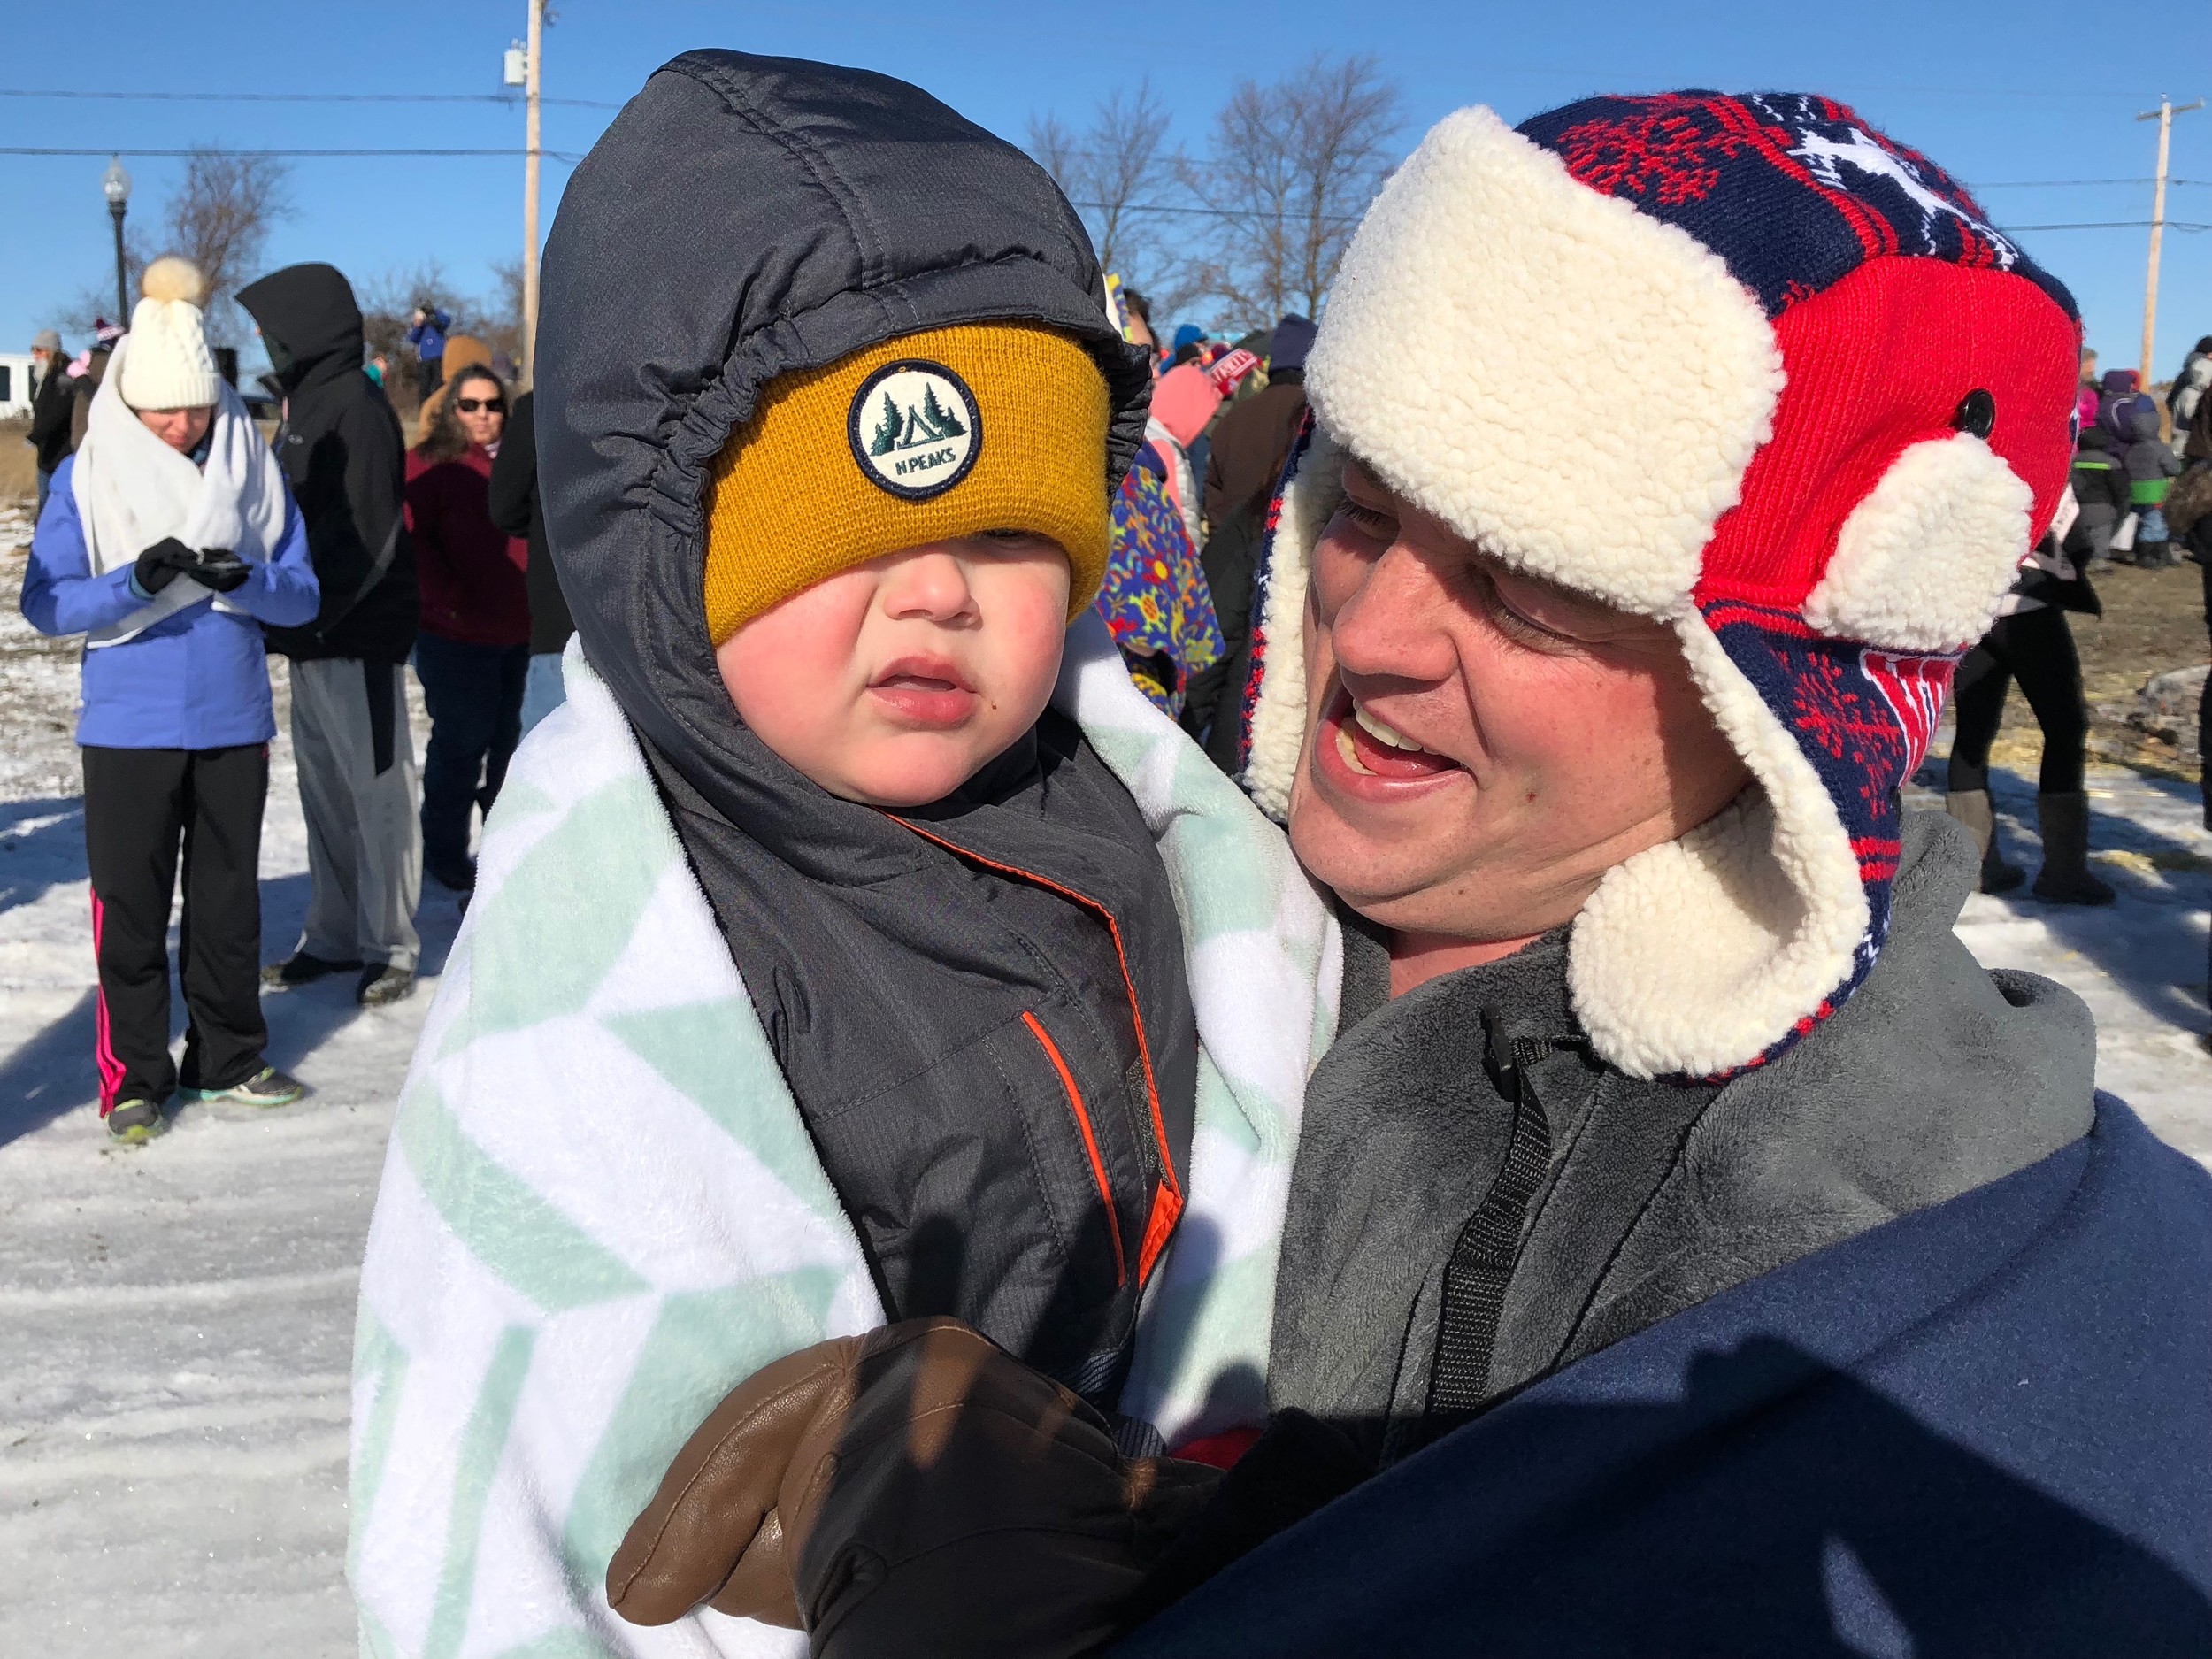 Before running in, Blake Hayden holds 2-year-old Wesley Murray, his girlfriend’s son. “He wants to jump in,” said Mr. Hayden.